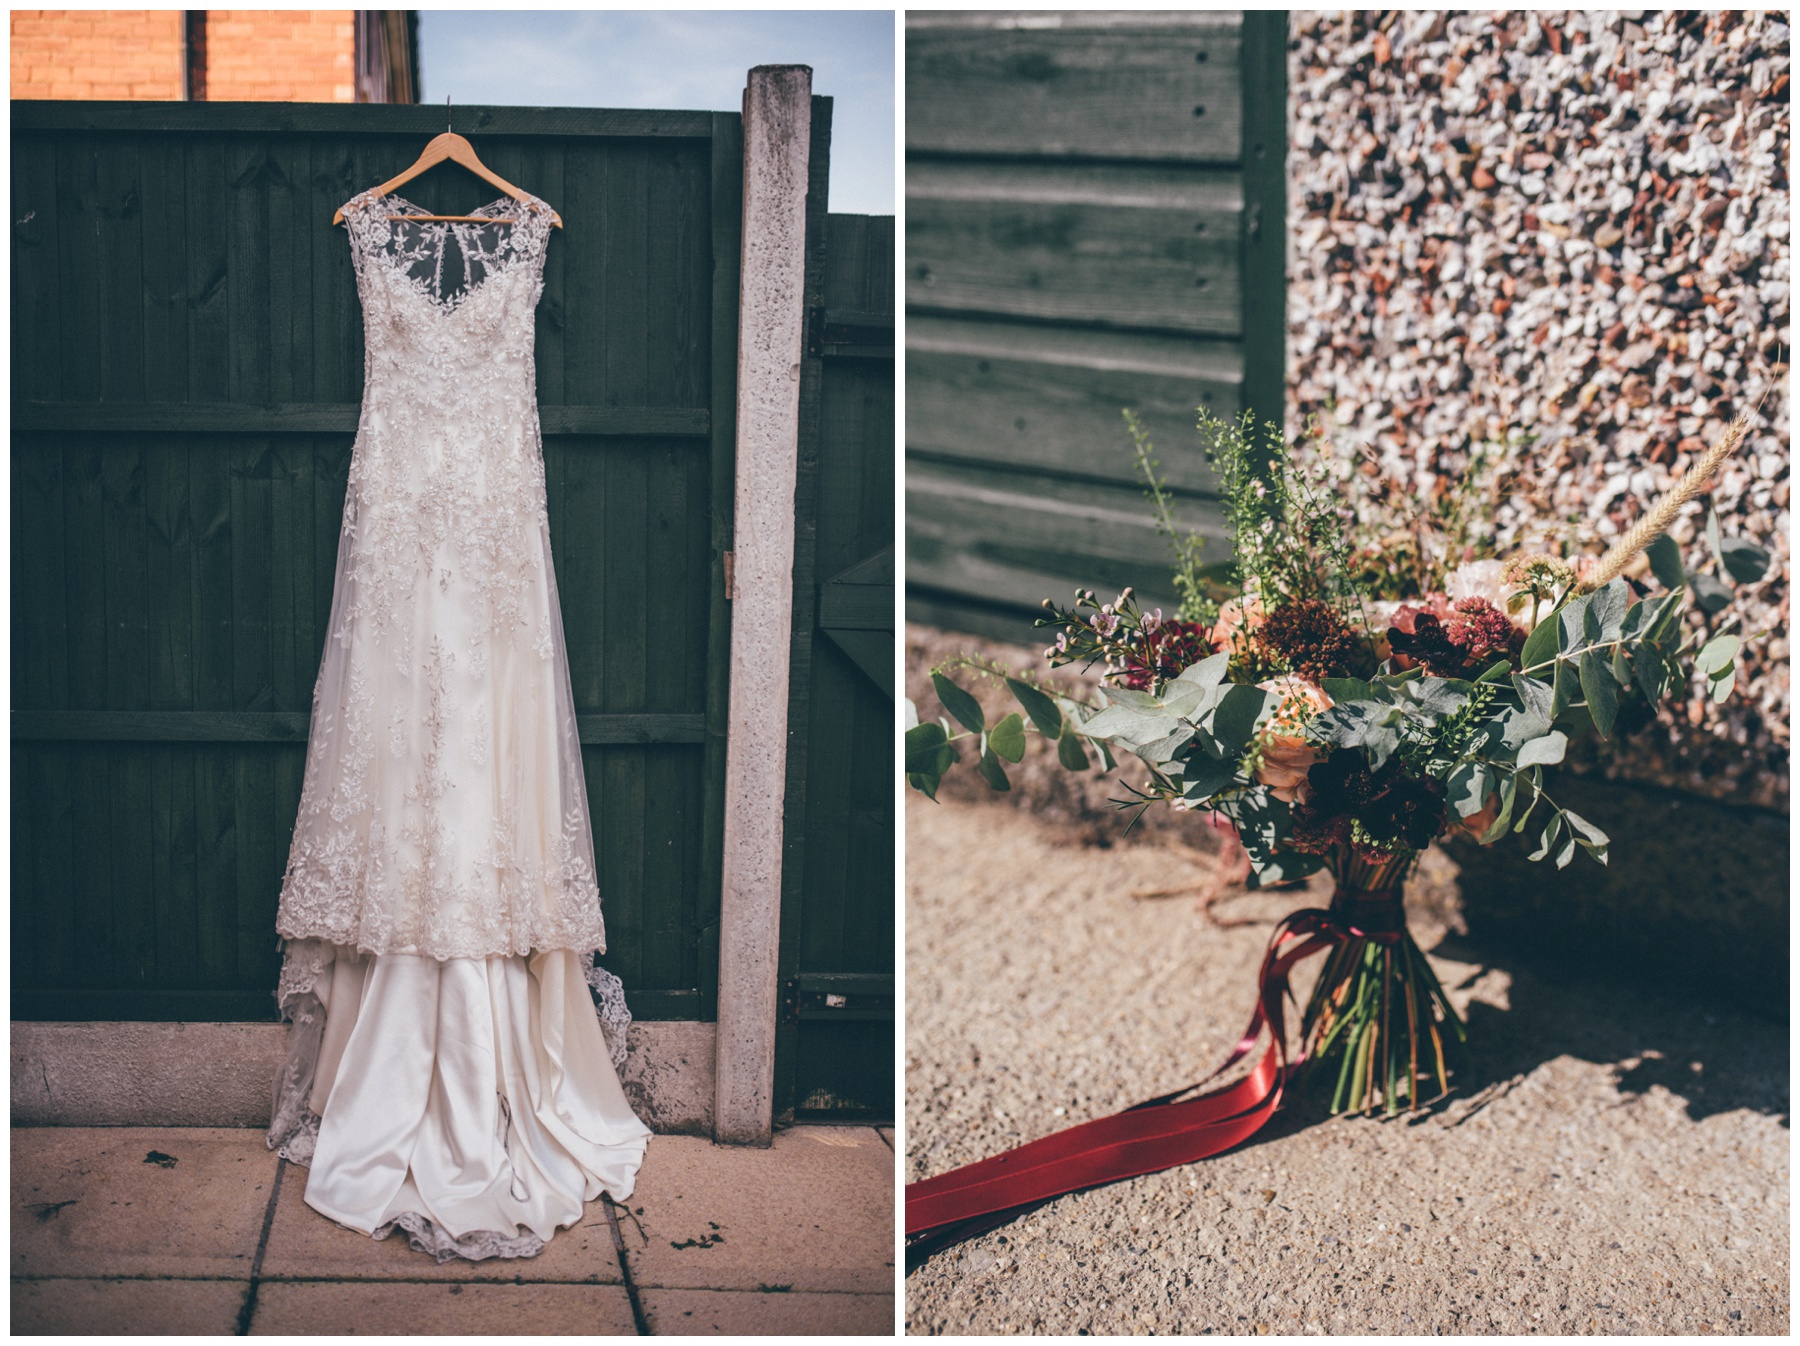 Stunning lace gown hung up and wild flowers in the garden for the Sheffield city centre wedding.